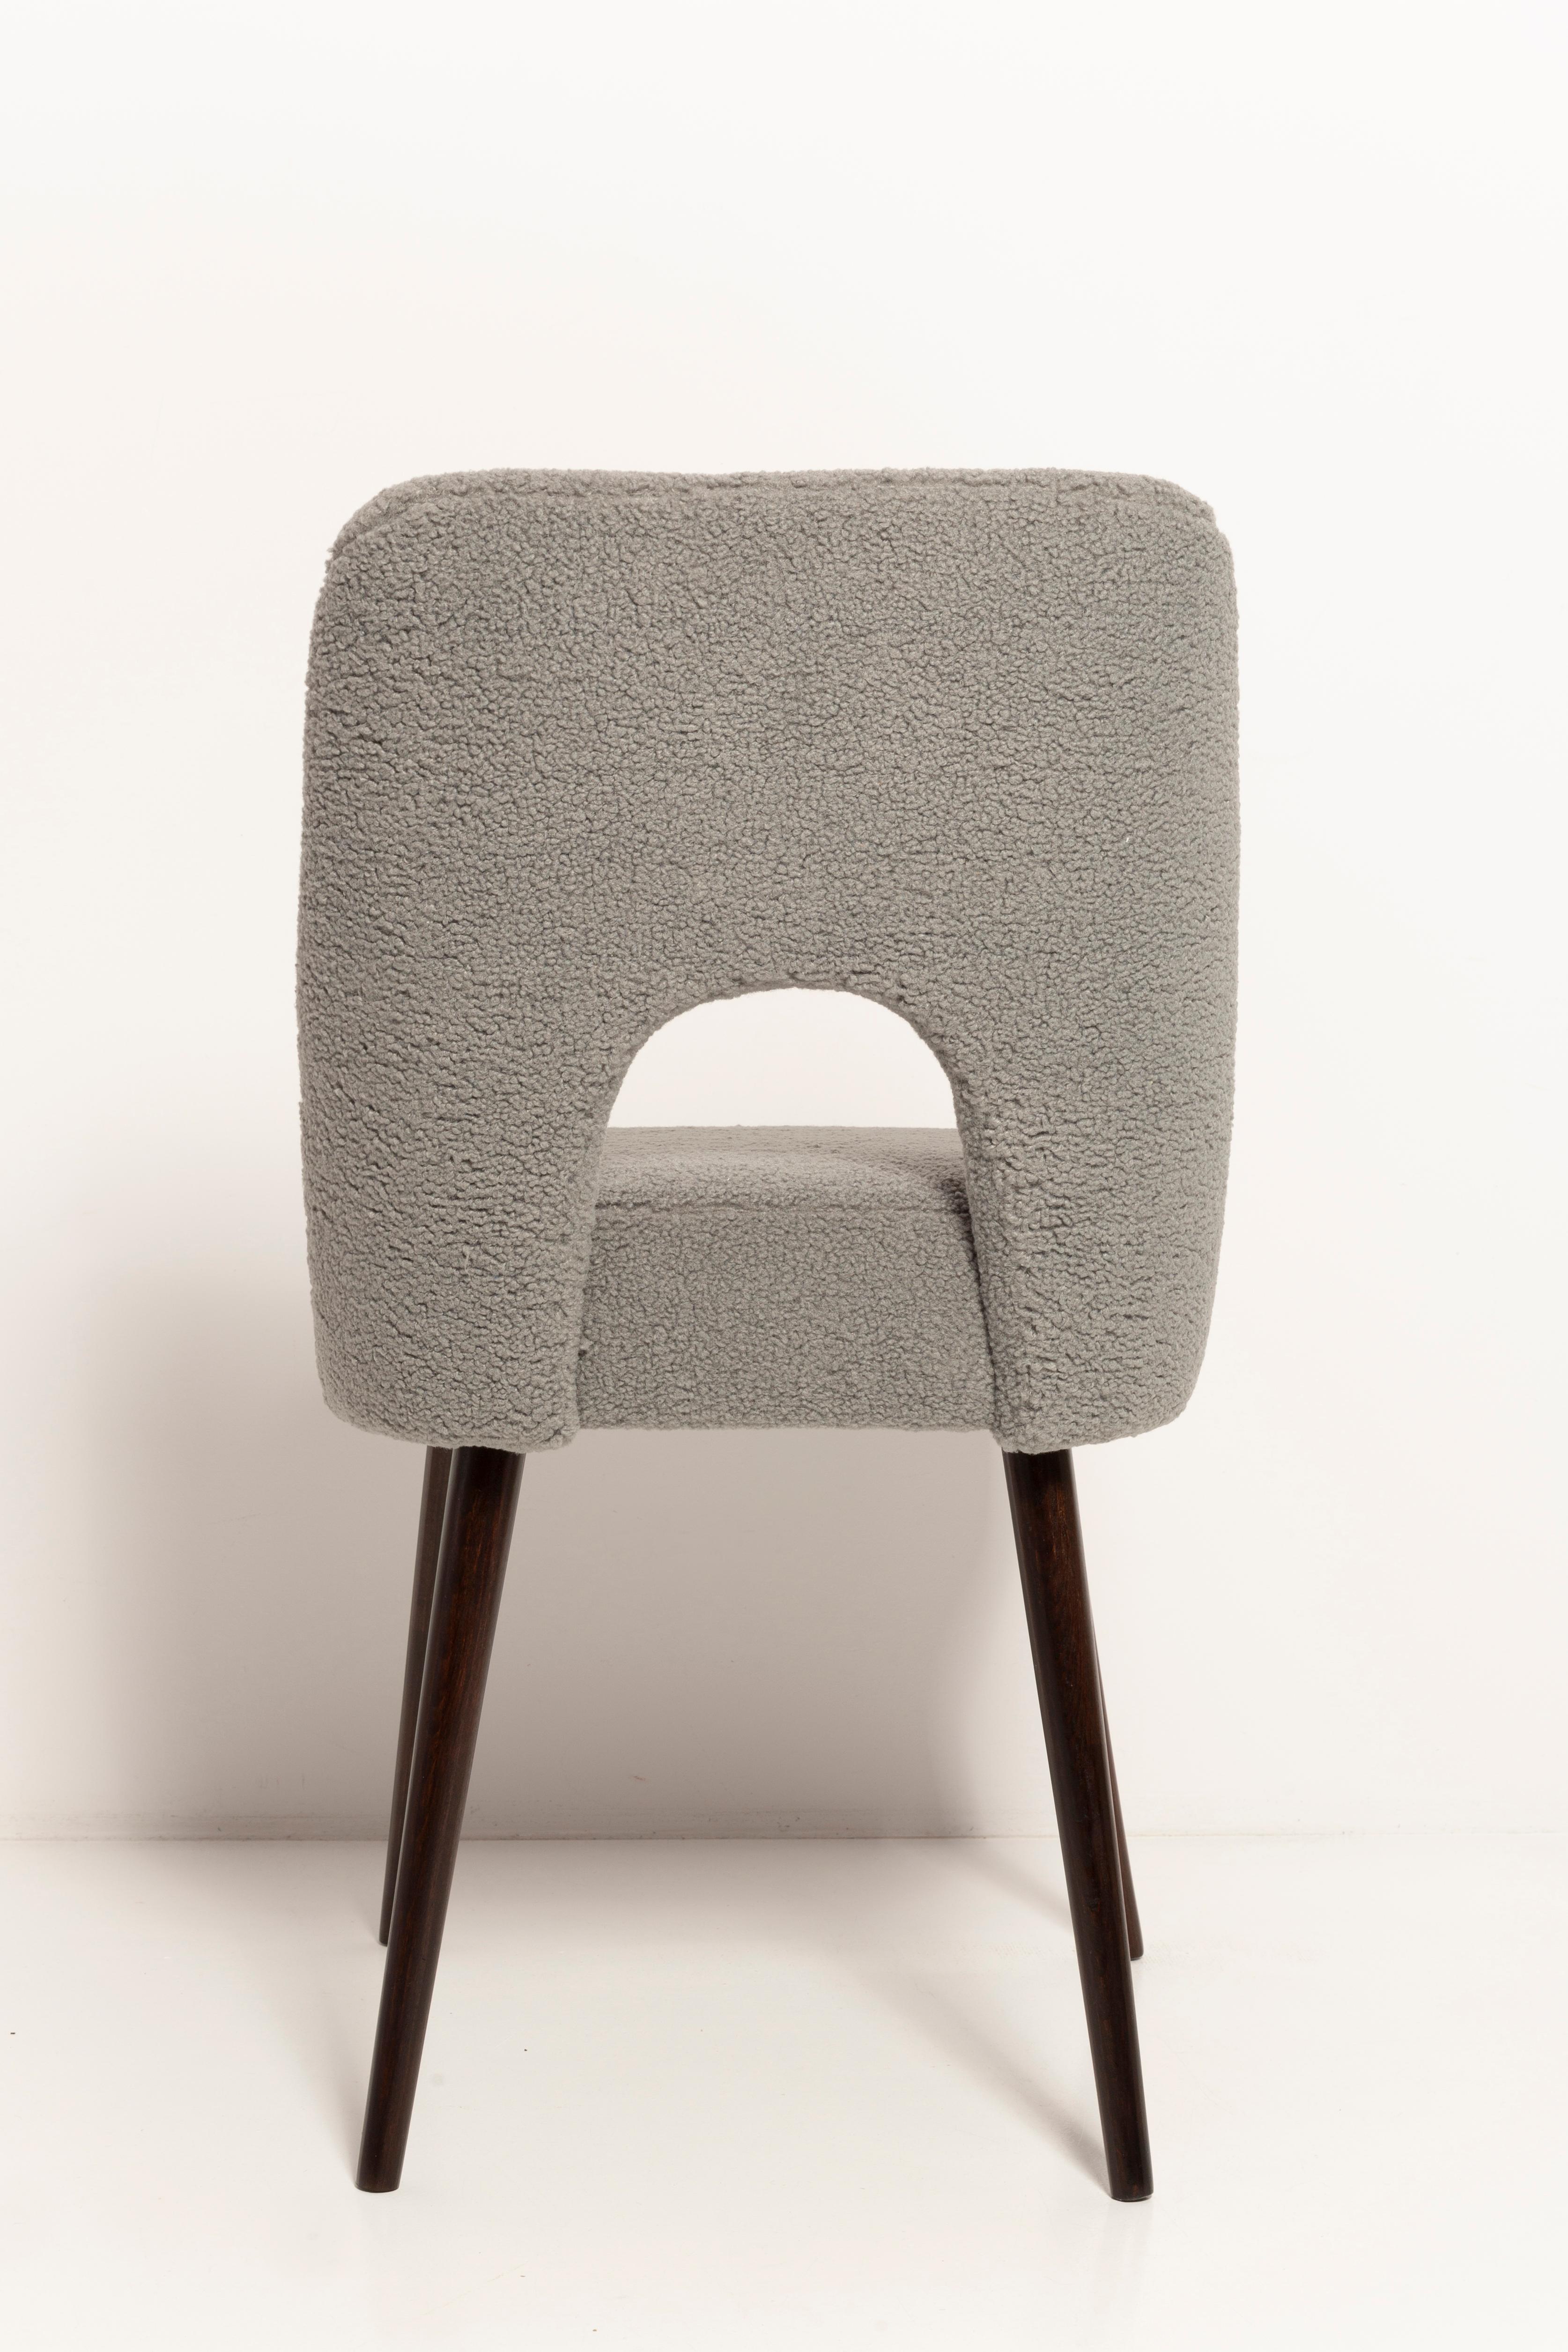 Gray Boucle 'Shell' Chair, Europe, 1960s For Sale 4